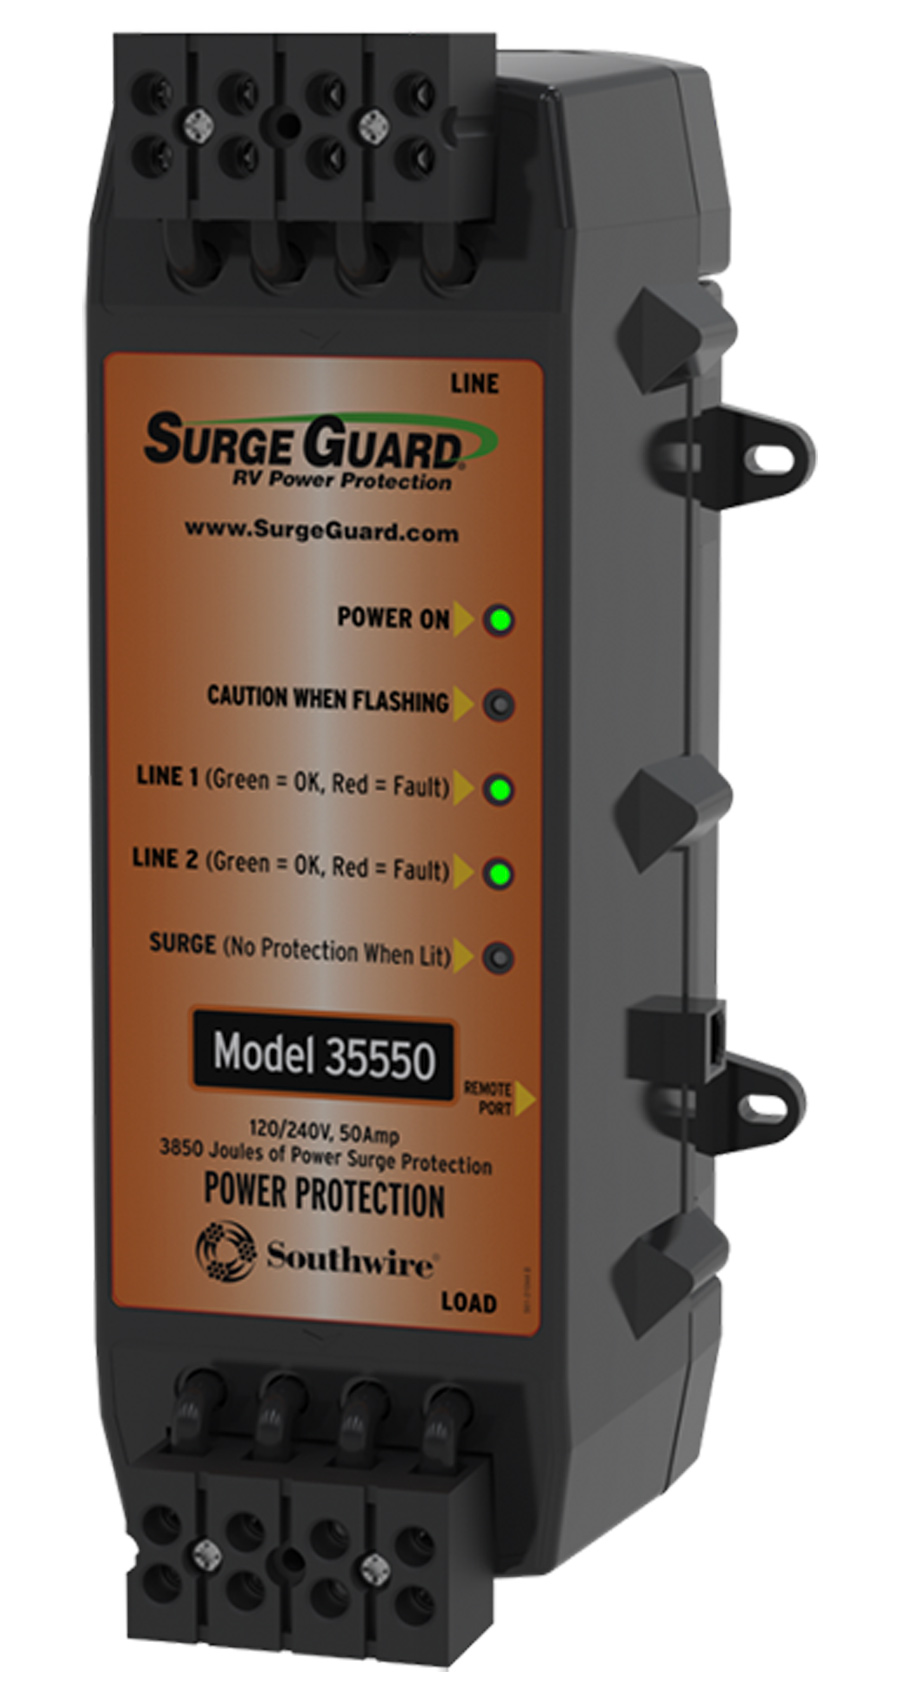 black Surge Guard 35550 with copper detailing